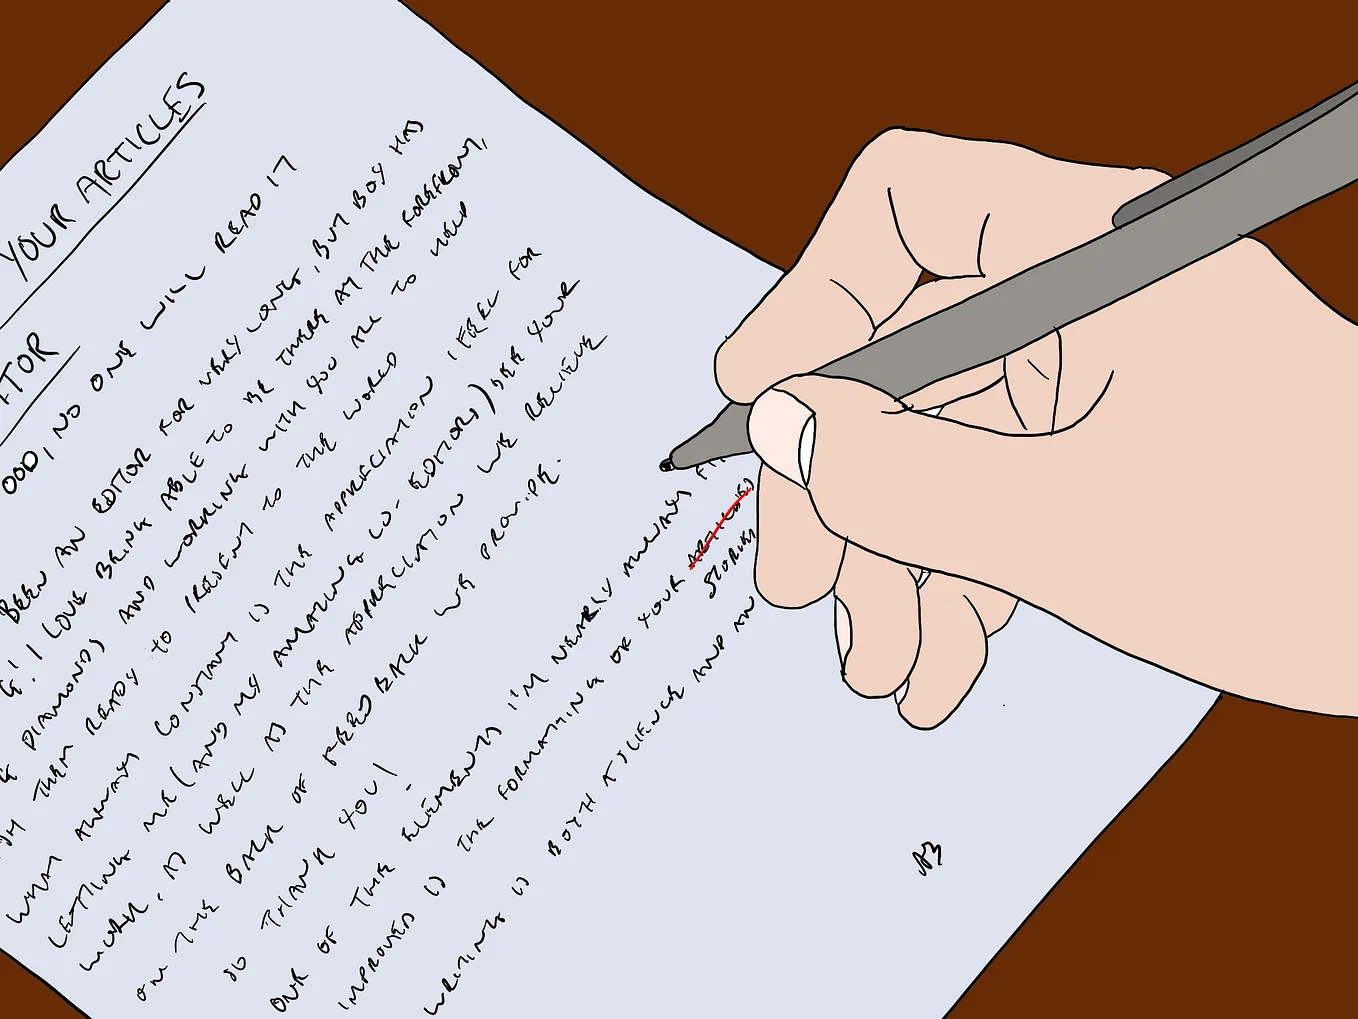 Illustration of someone editing writing on a piece of paper